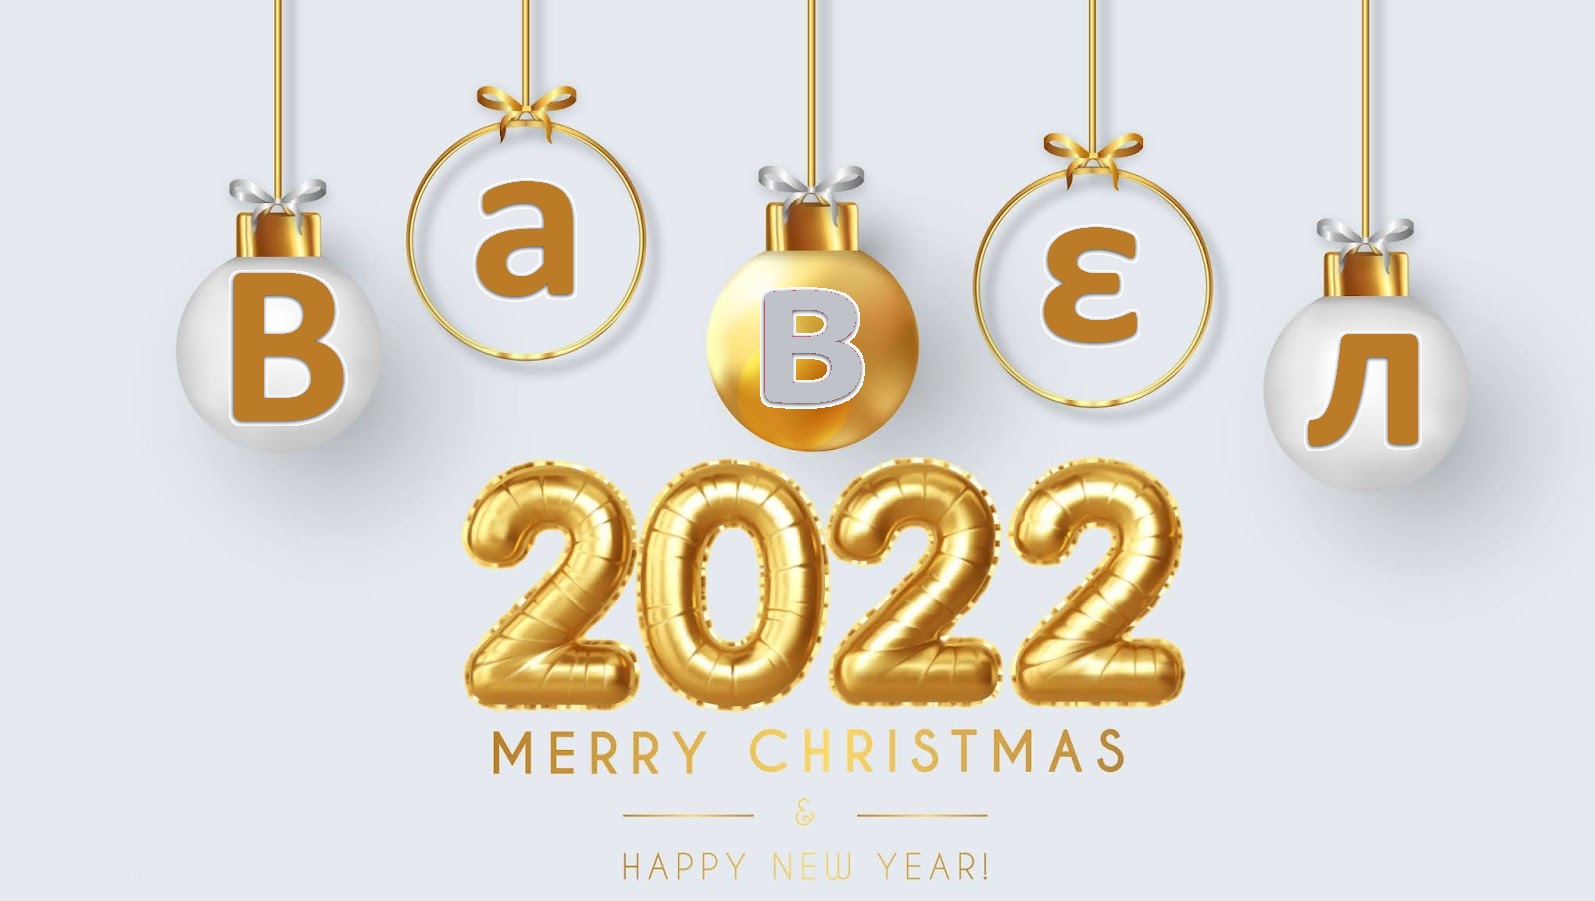 Babel New Year 2022